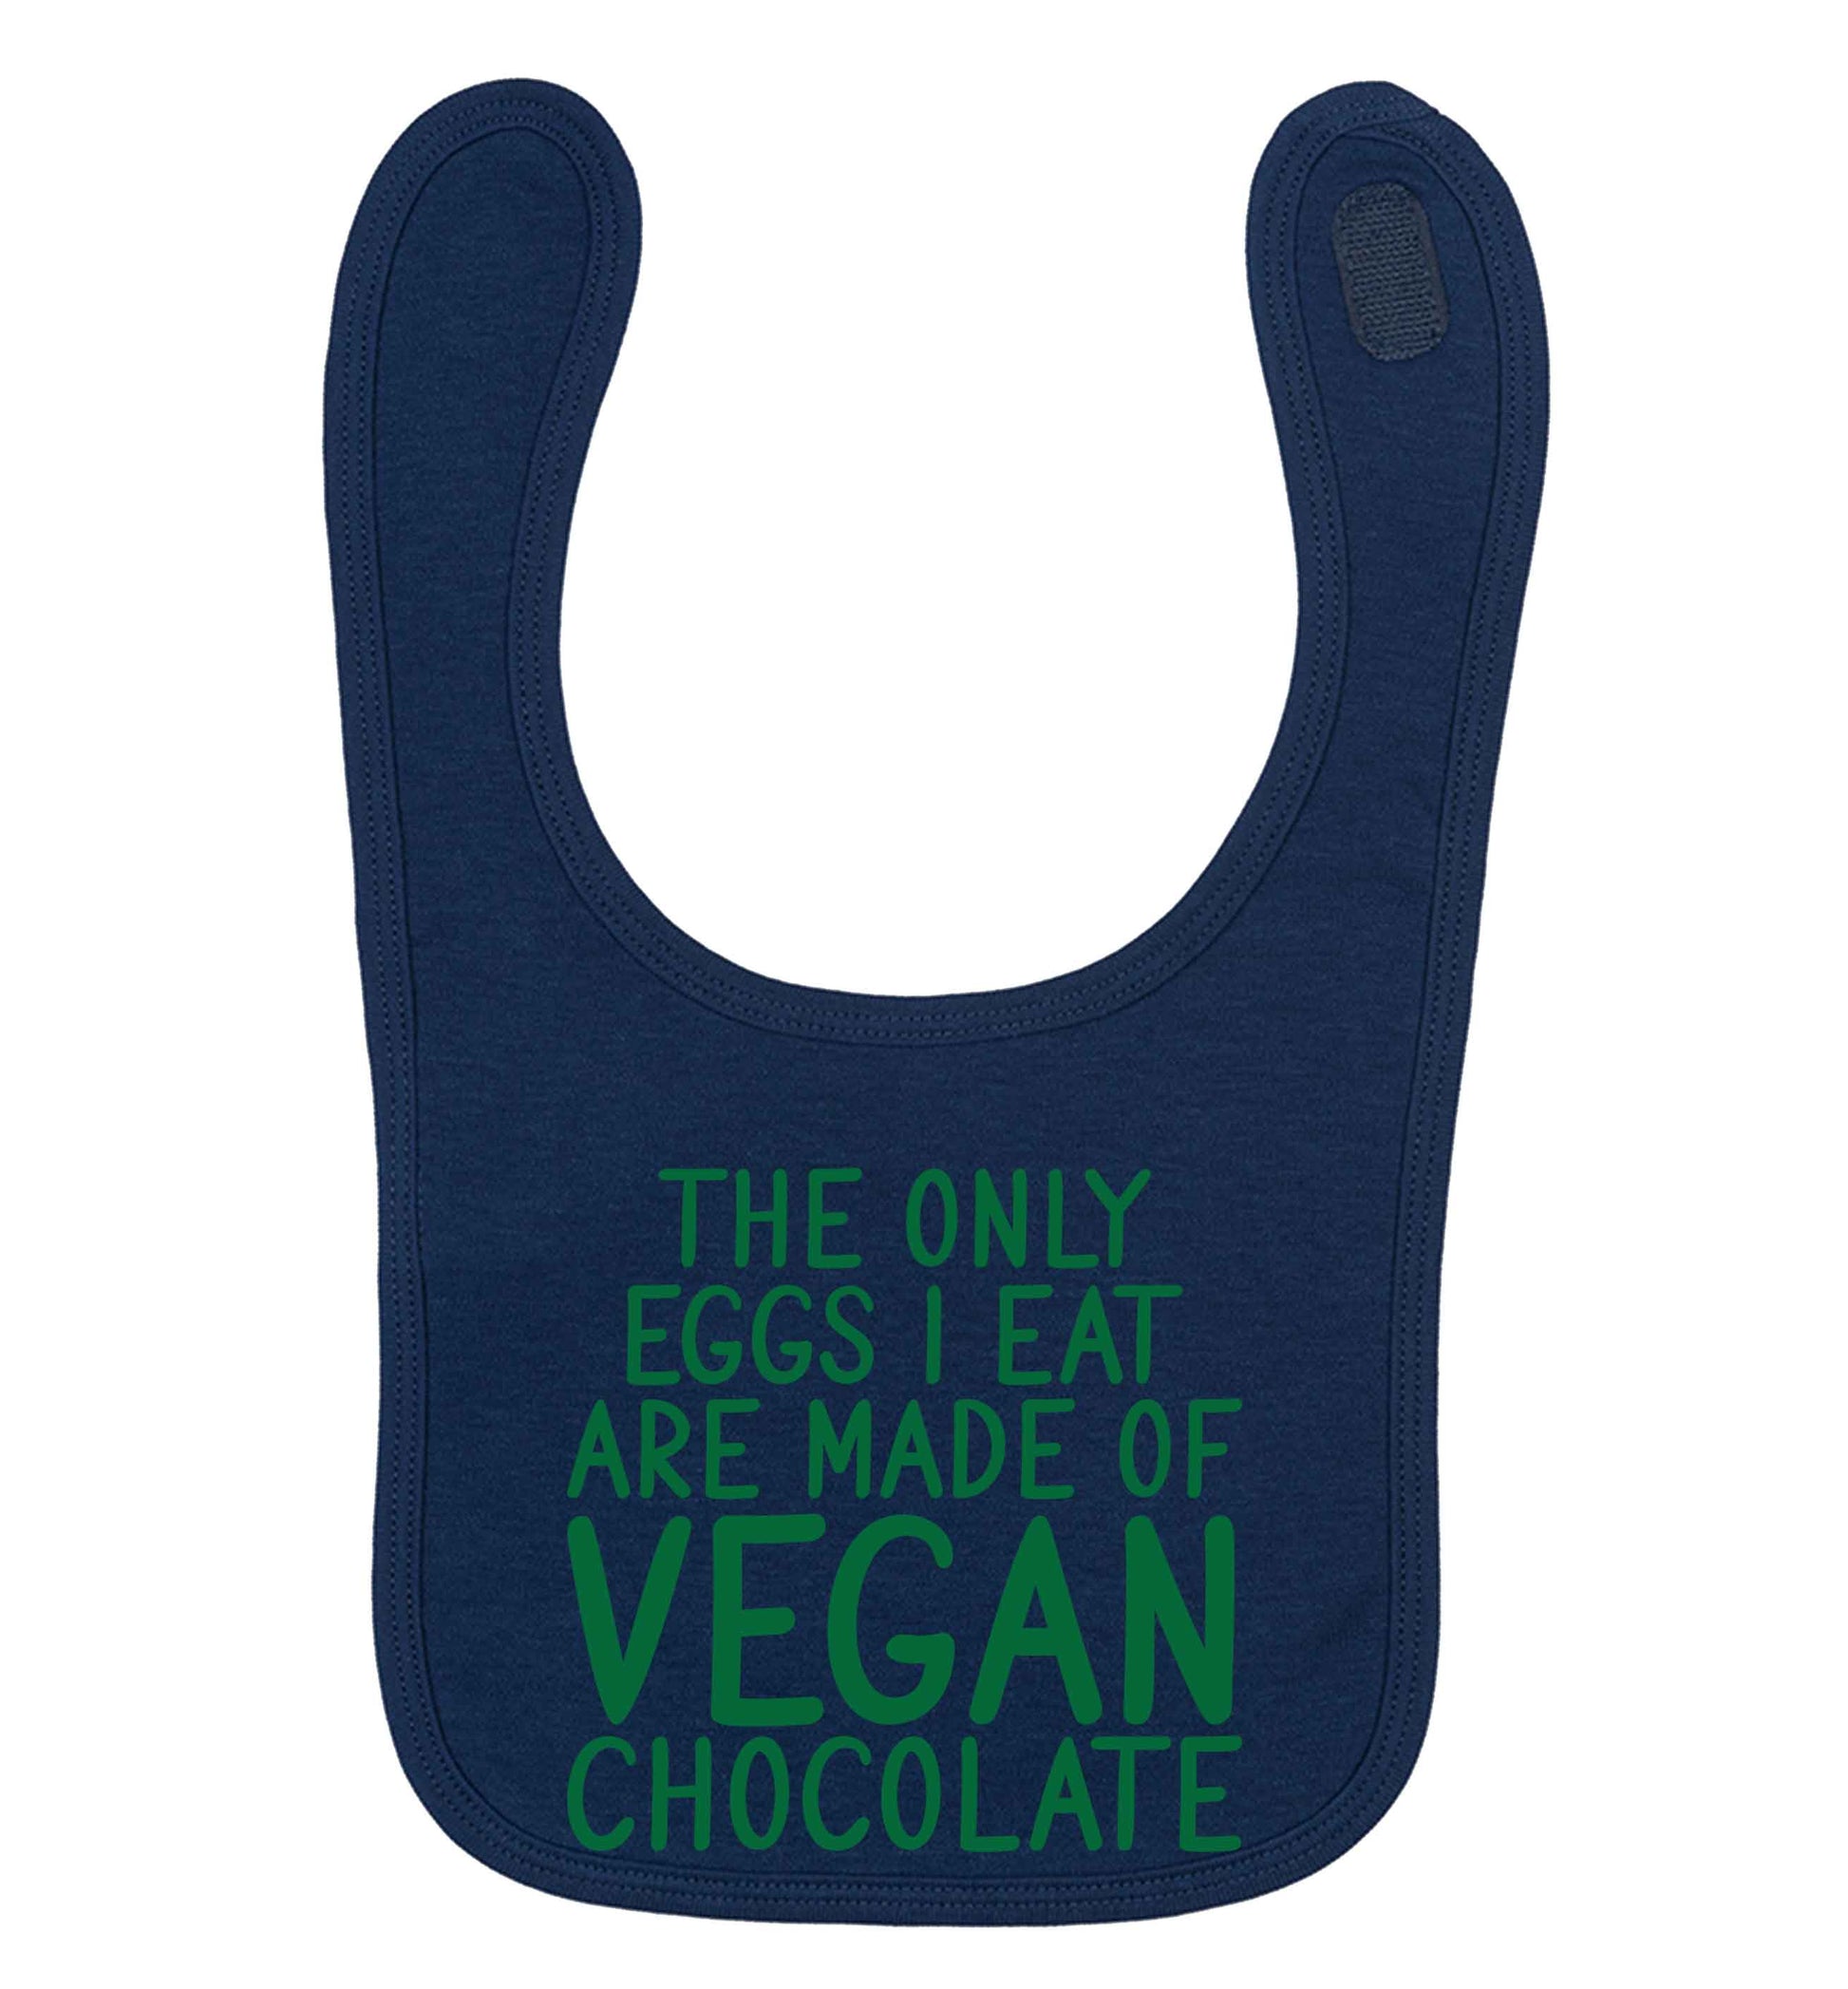 The only eggs I eat are made of vegan chocolate navy baby bib